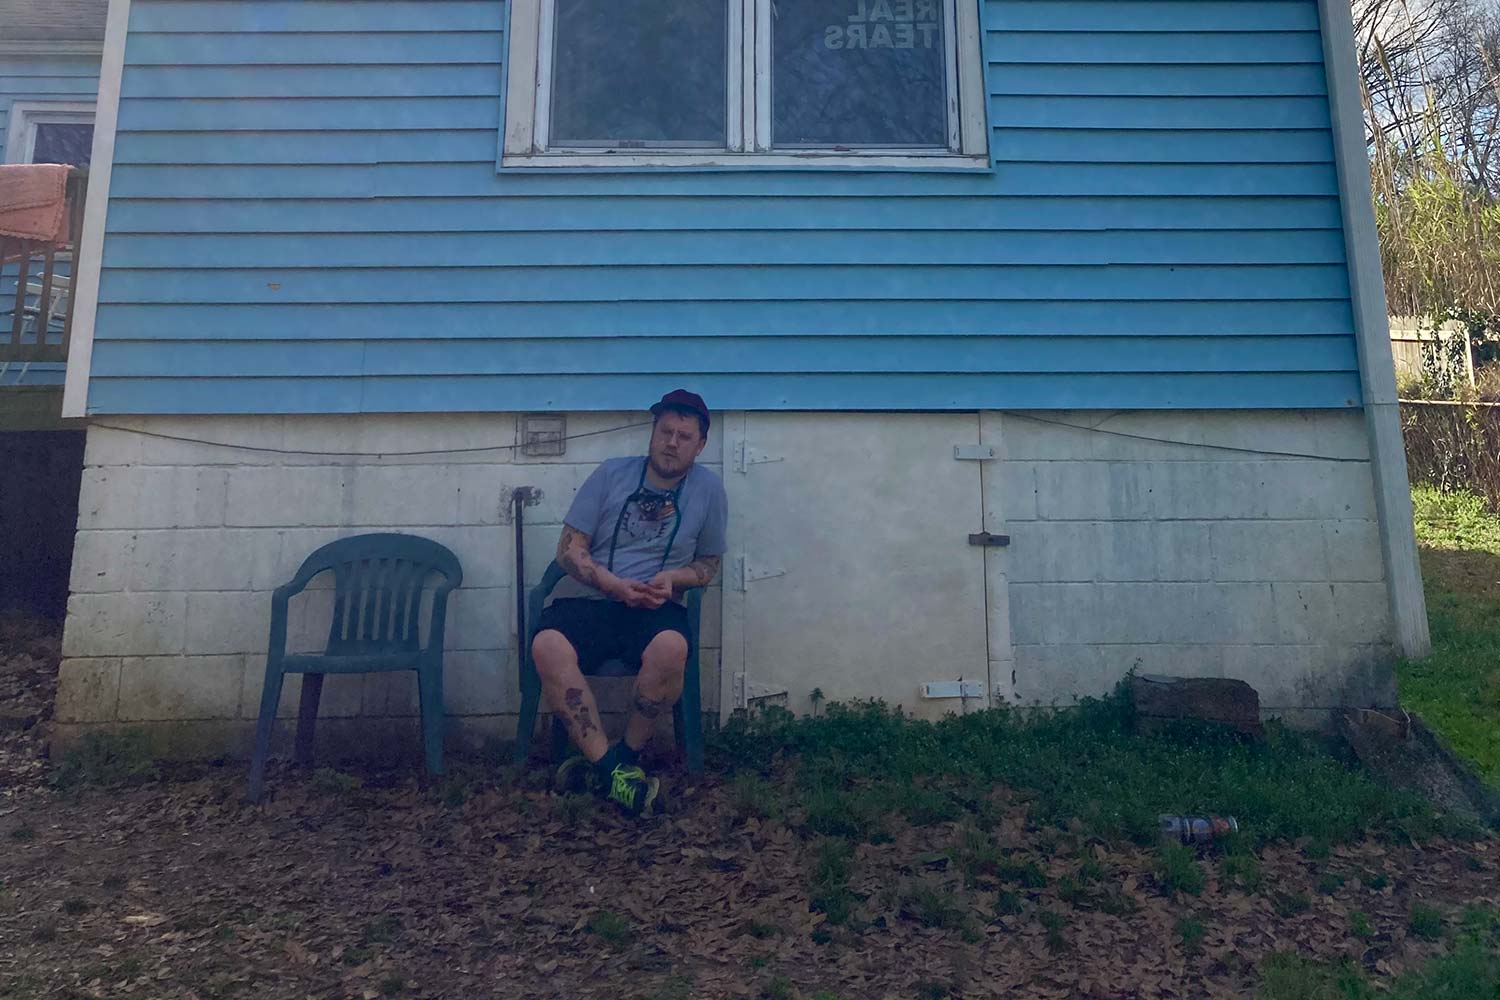 Jake Cook of Seal Pup sitting in a blue chair against a blue house